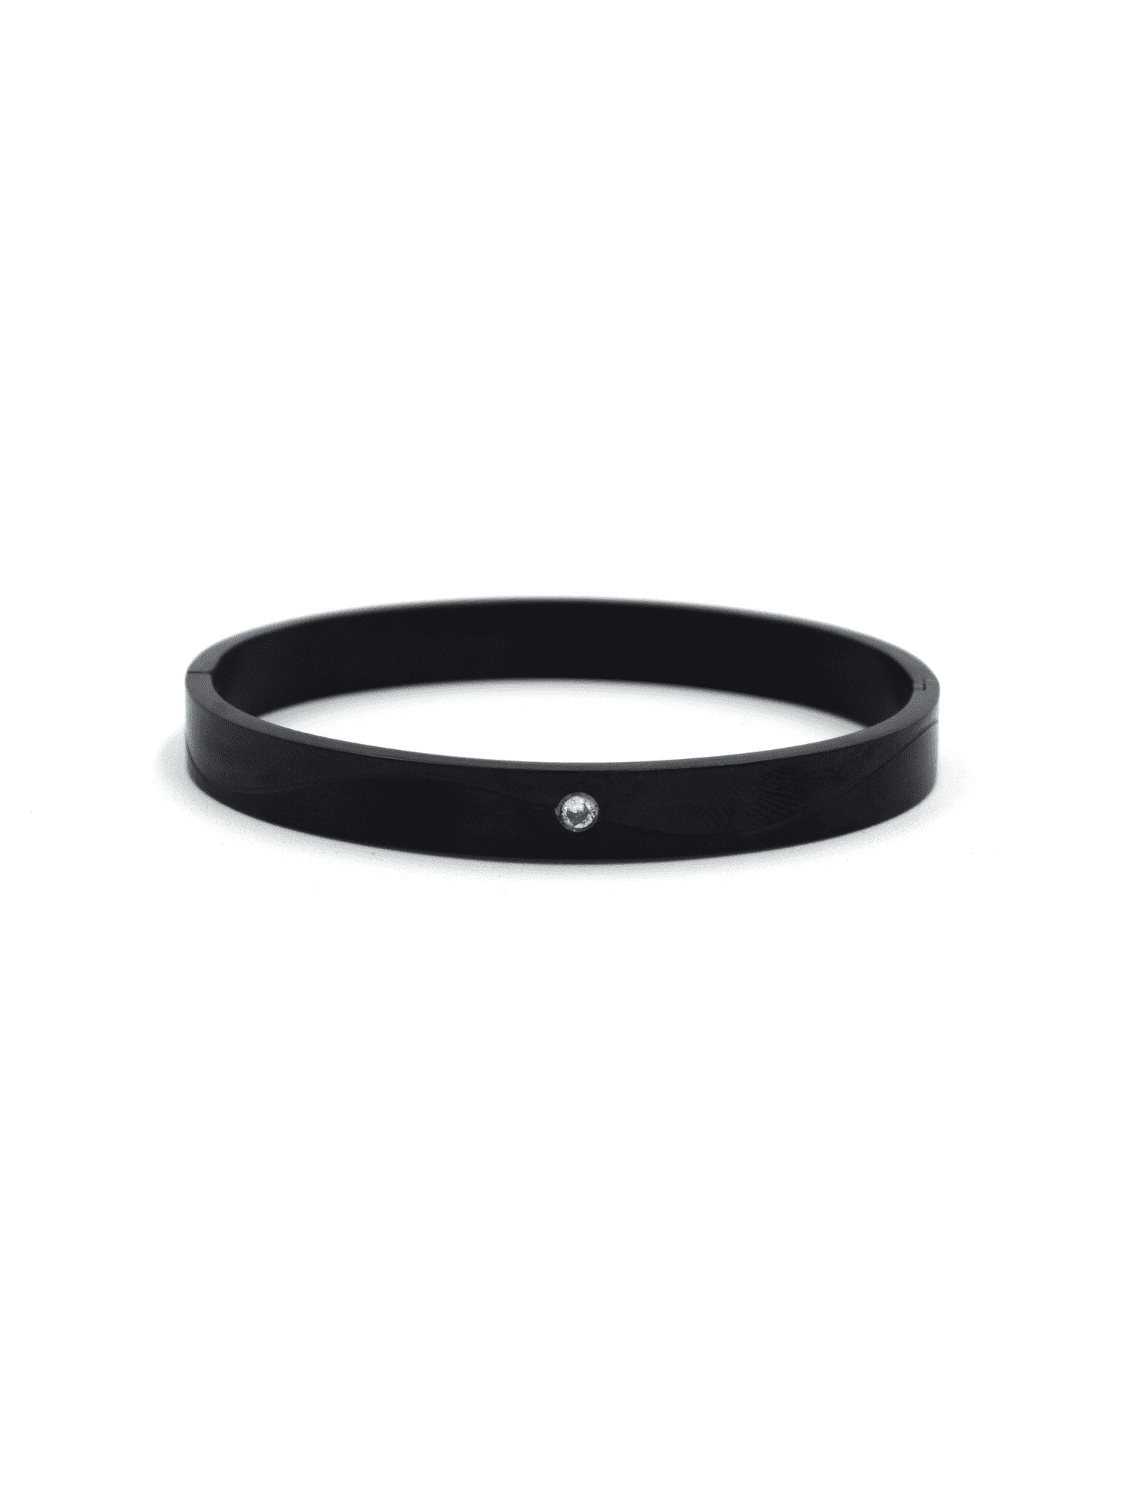 Solid Black With White Dot Openable Bracelet